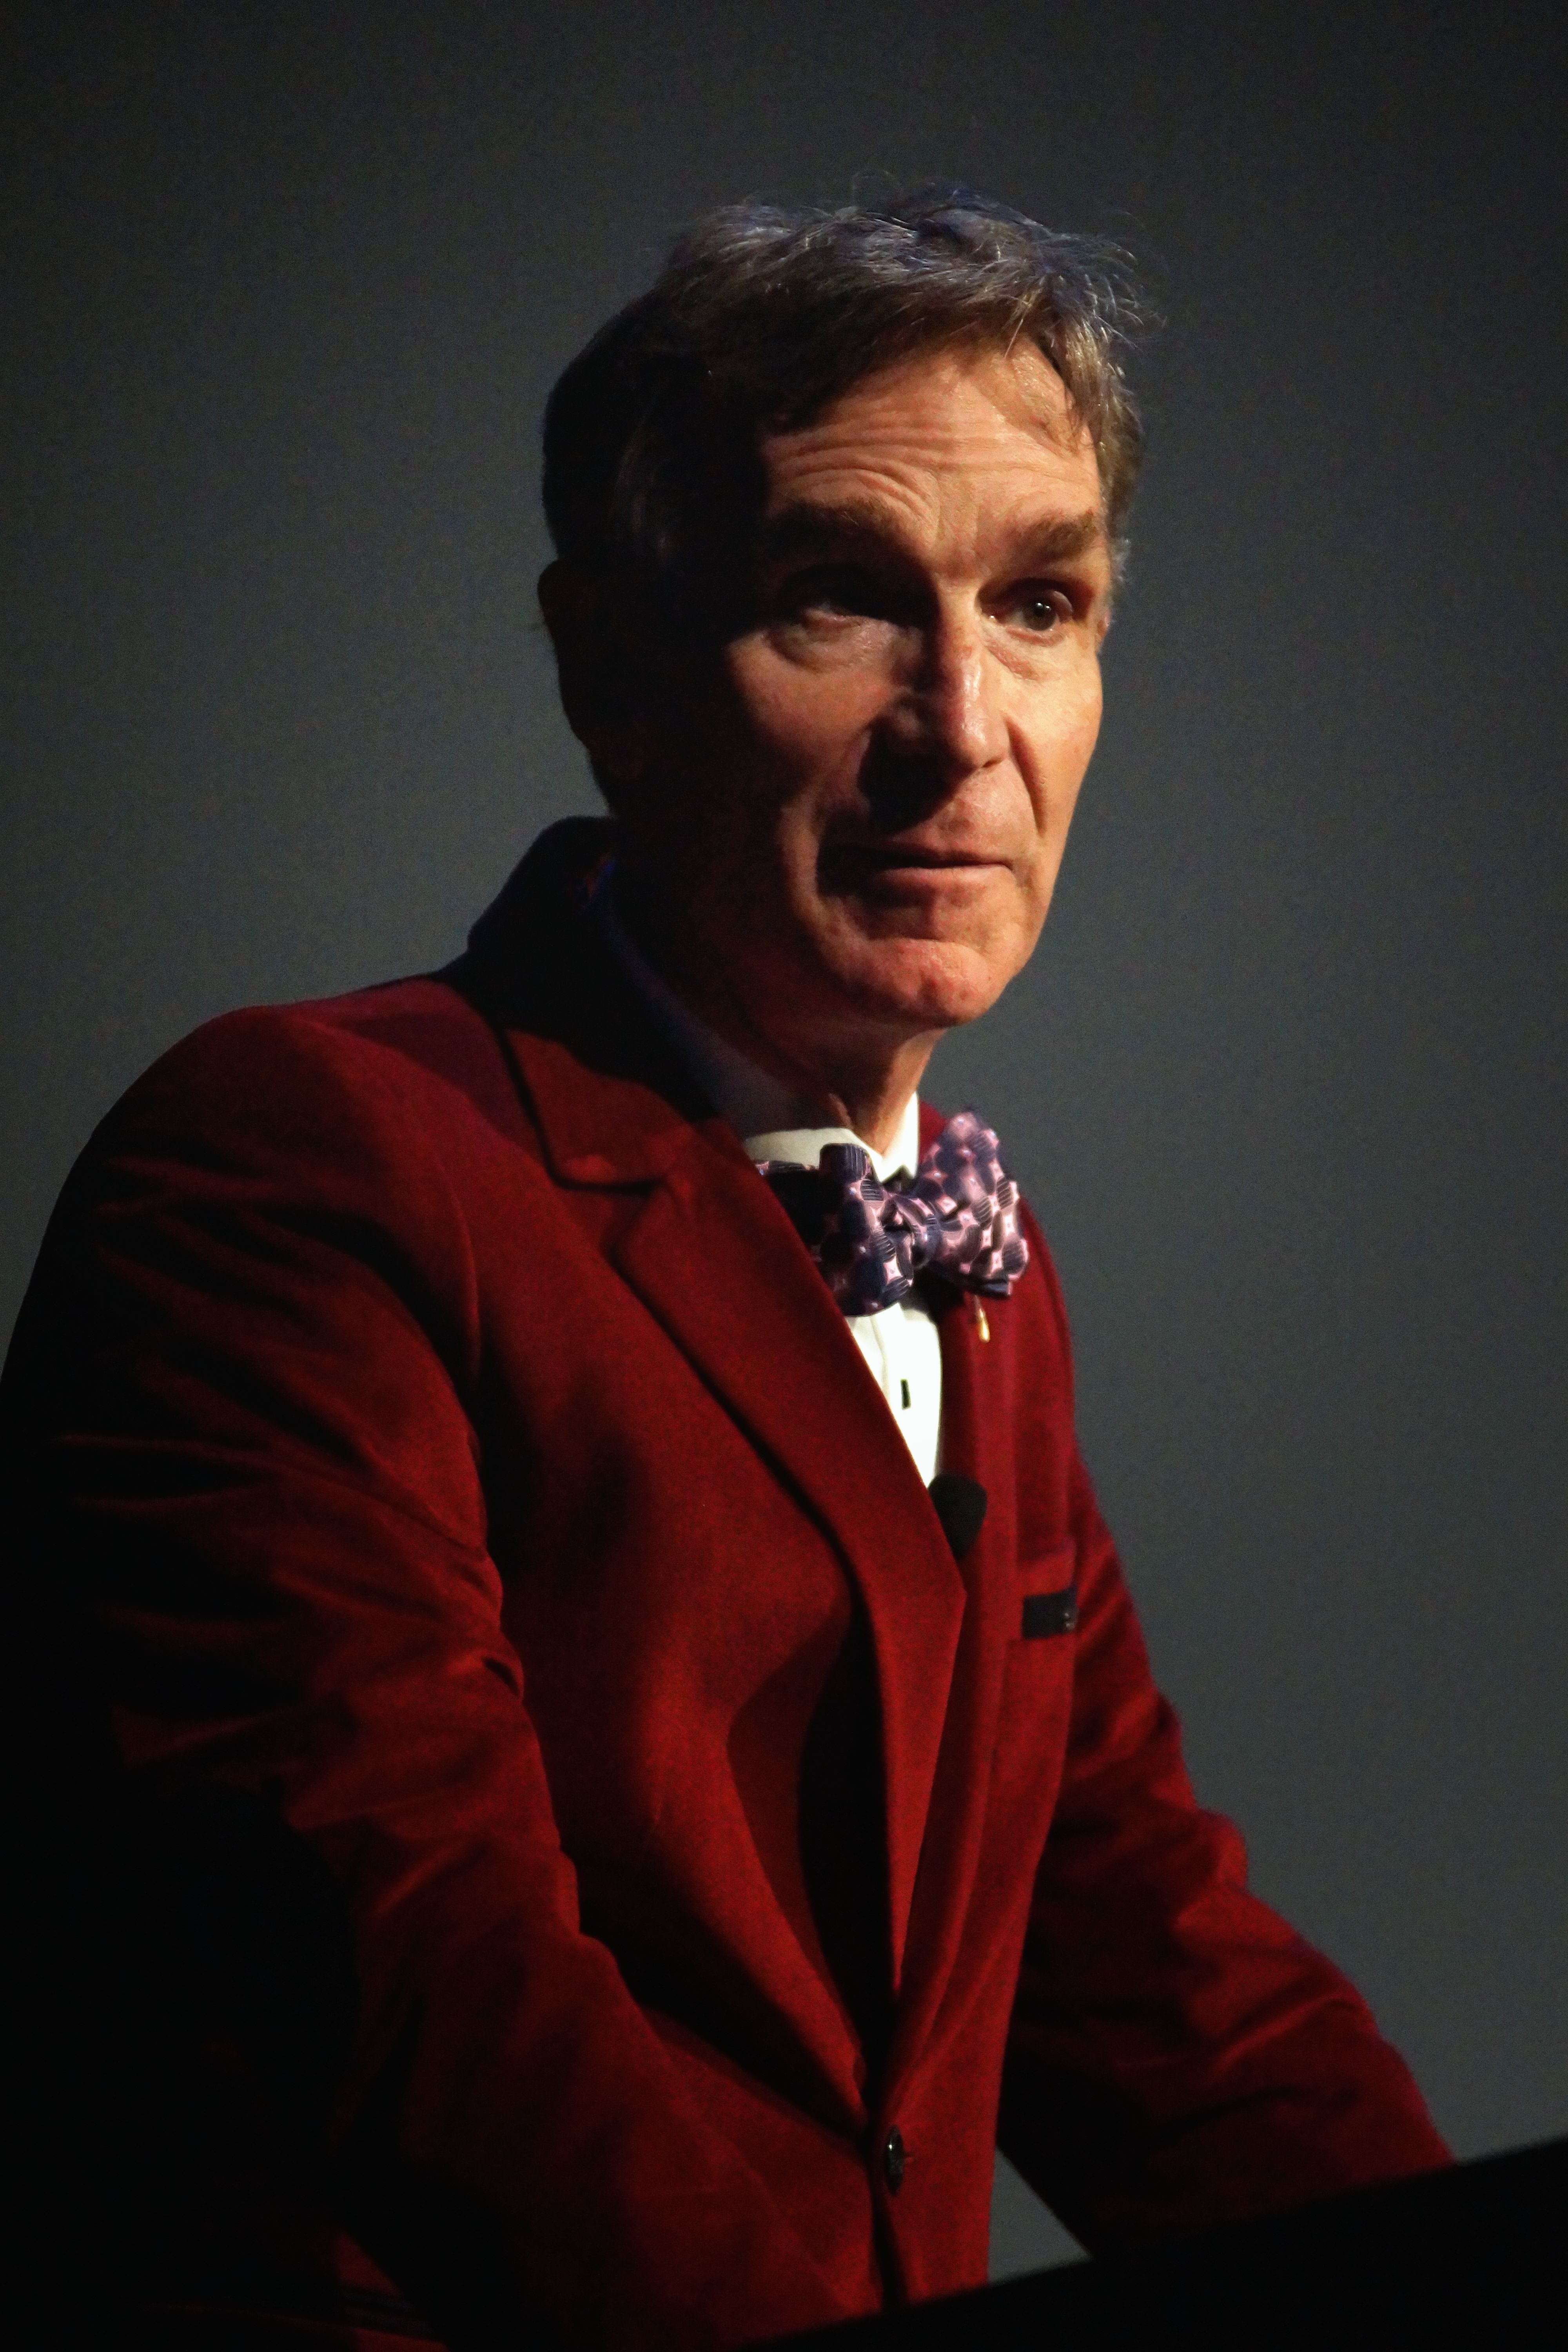 "Bill Nye is best known for his efforts to educate kids on the importance of science"